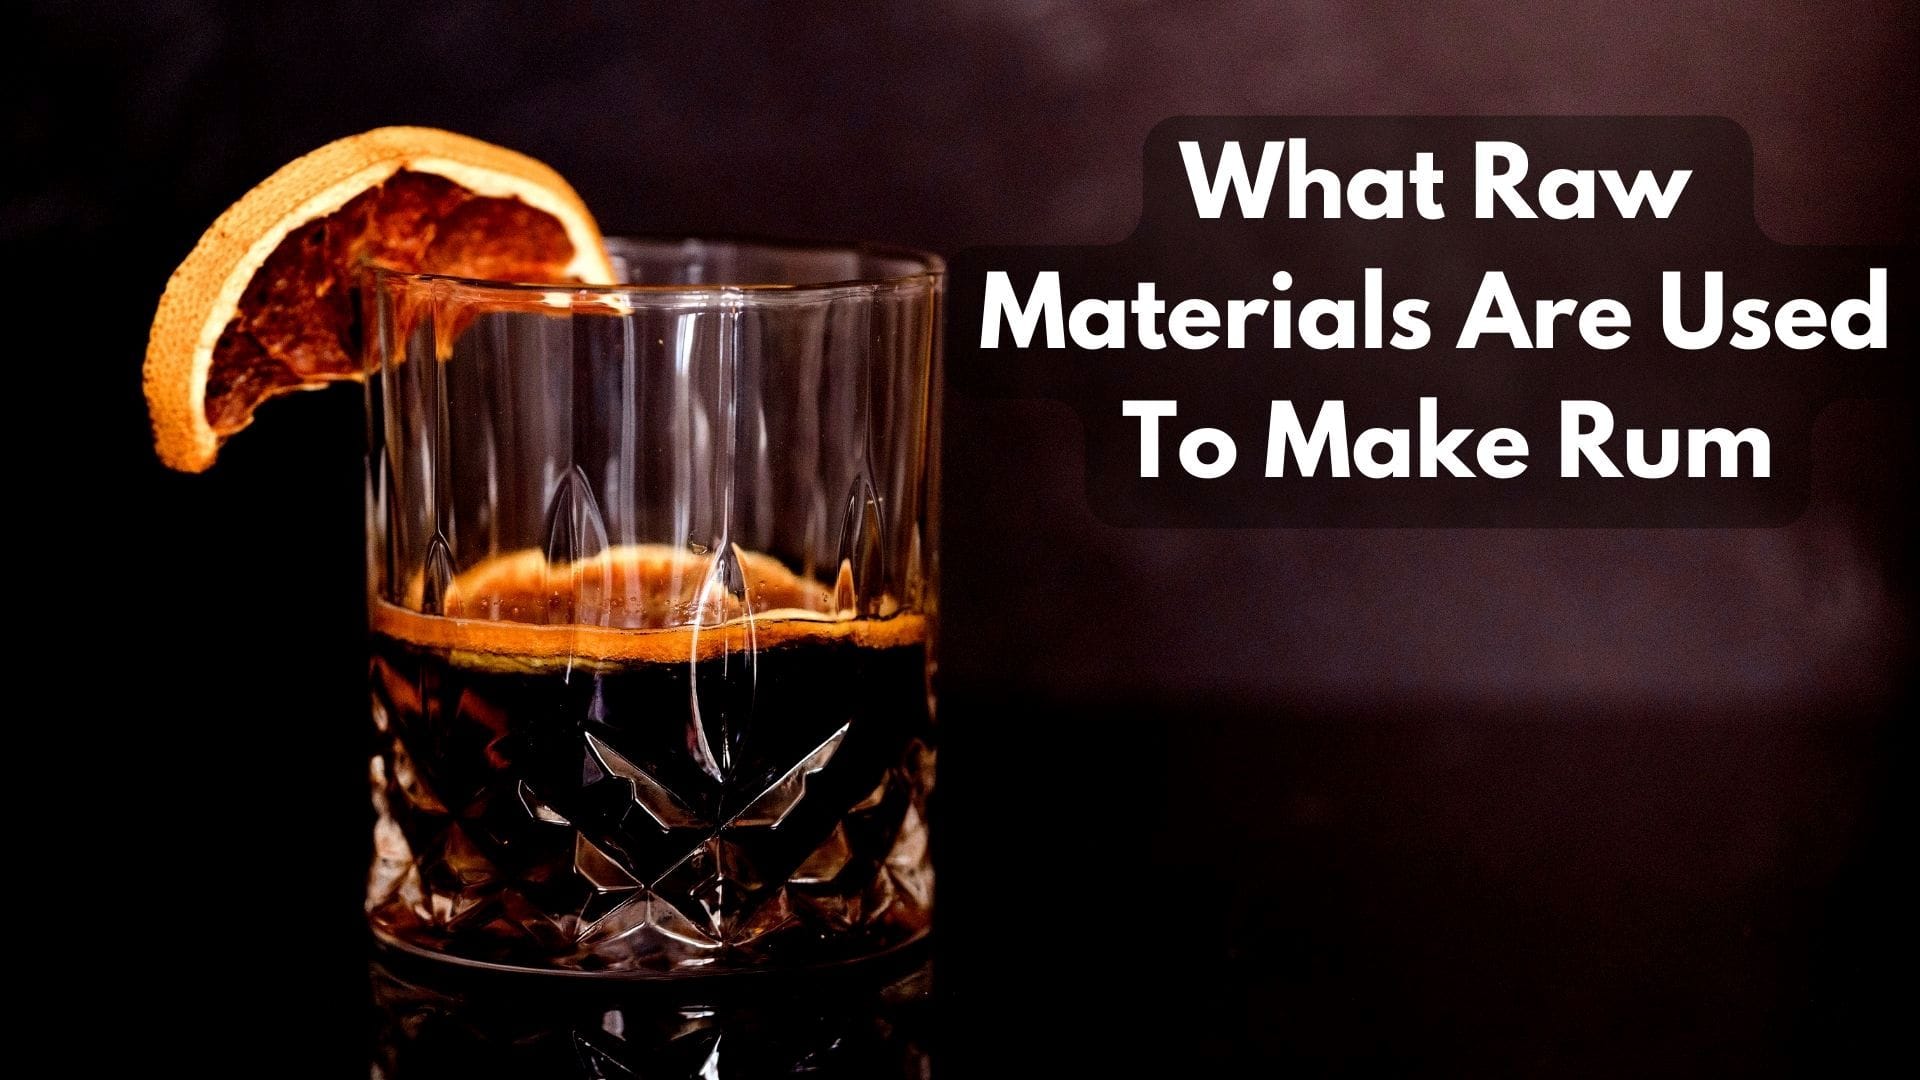 What Raw Materials Are Used To Make Rum?